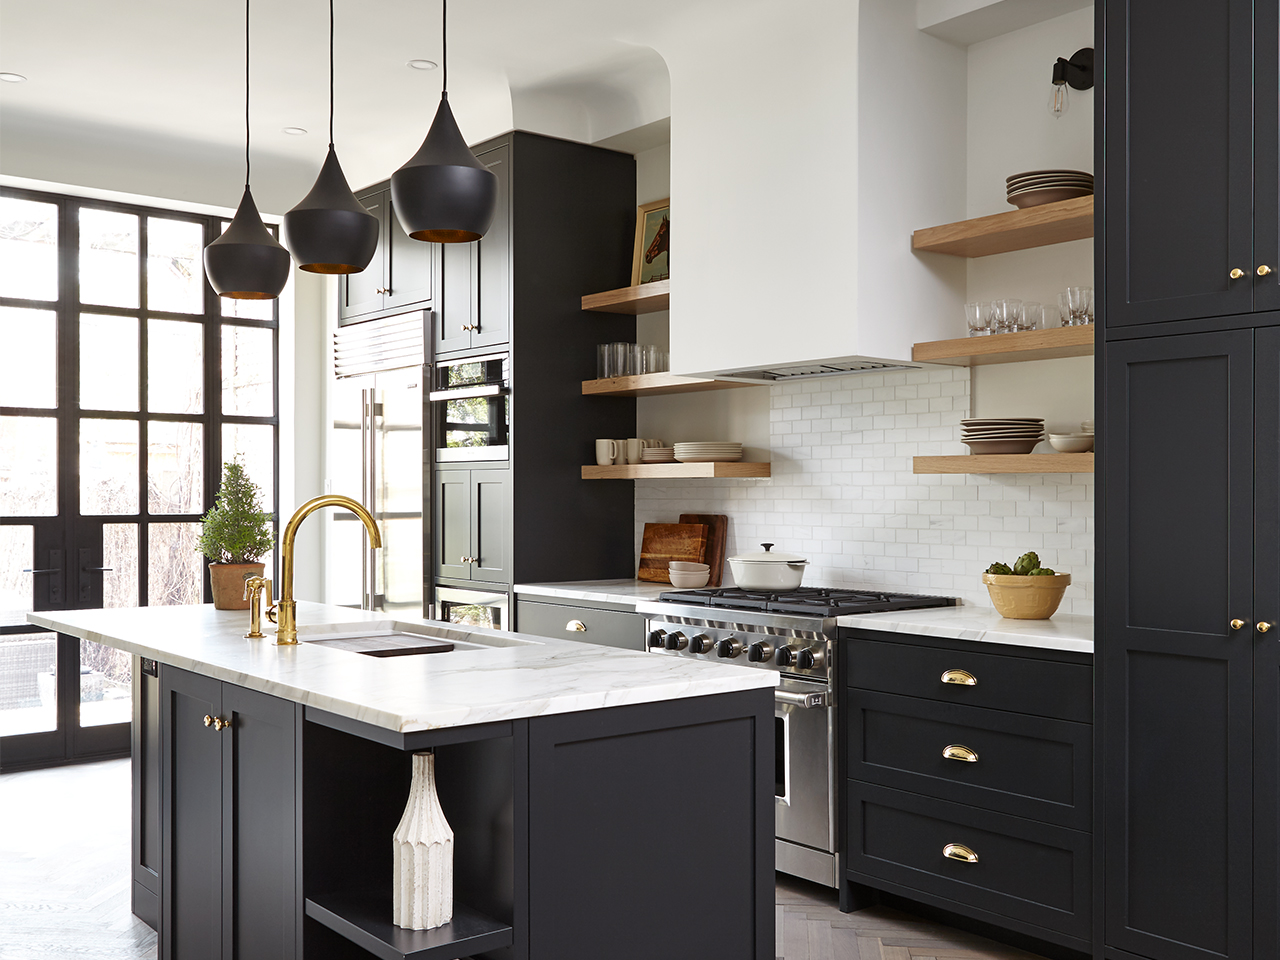 20 Of The Most Gorgeous Kitchen Design Ideas On Pinterest   Chatelaine